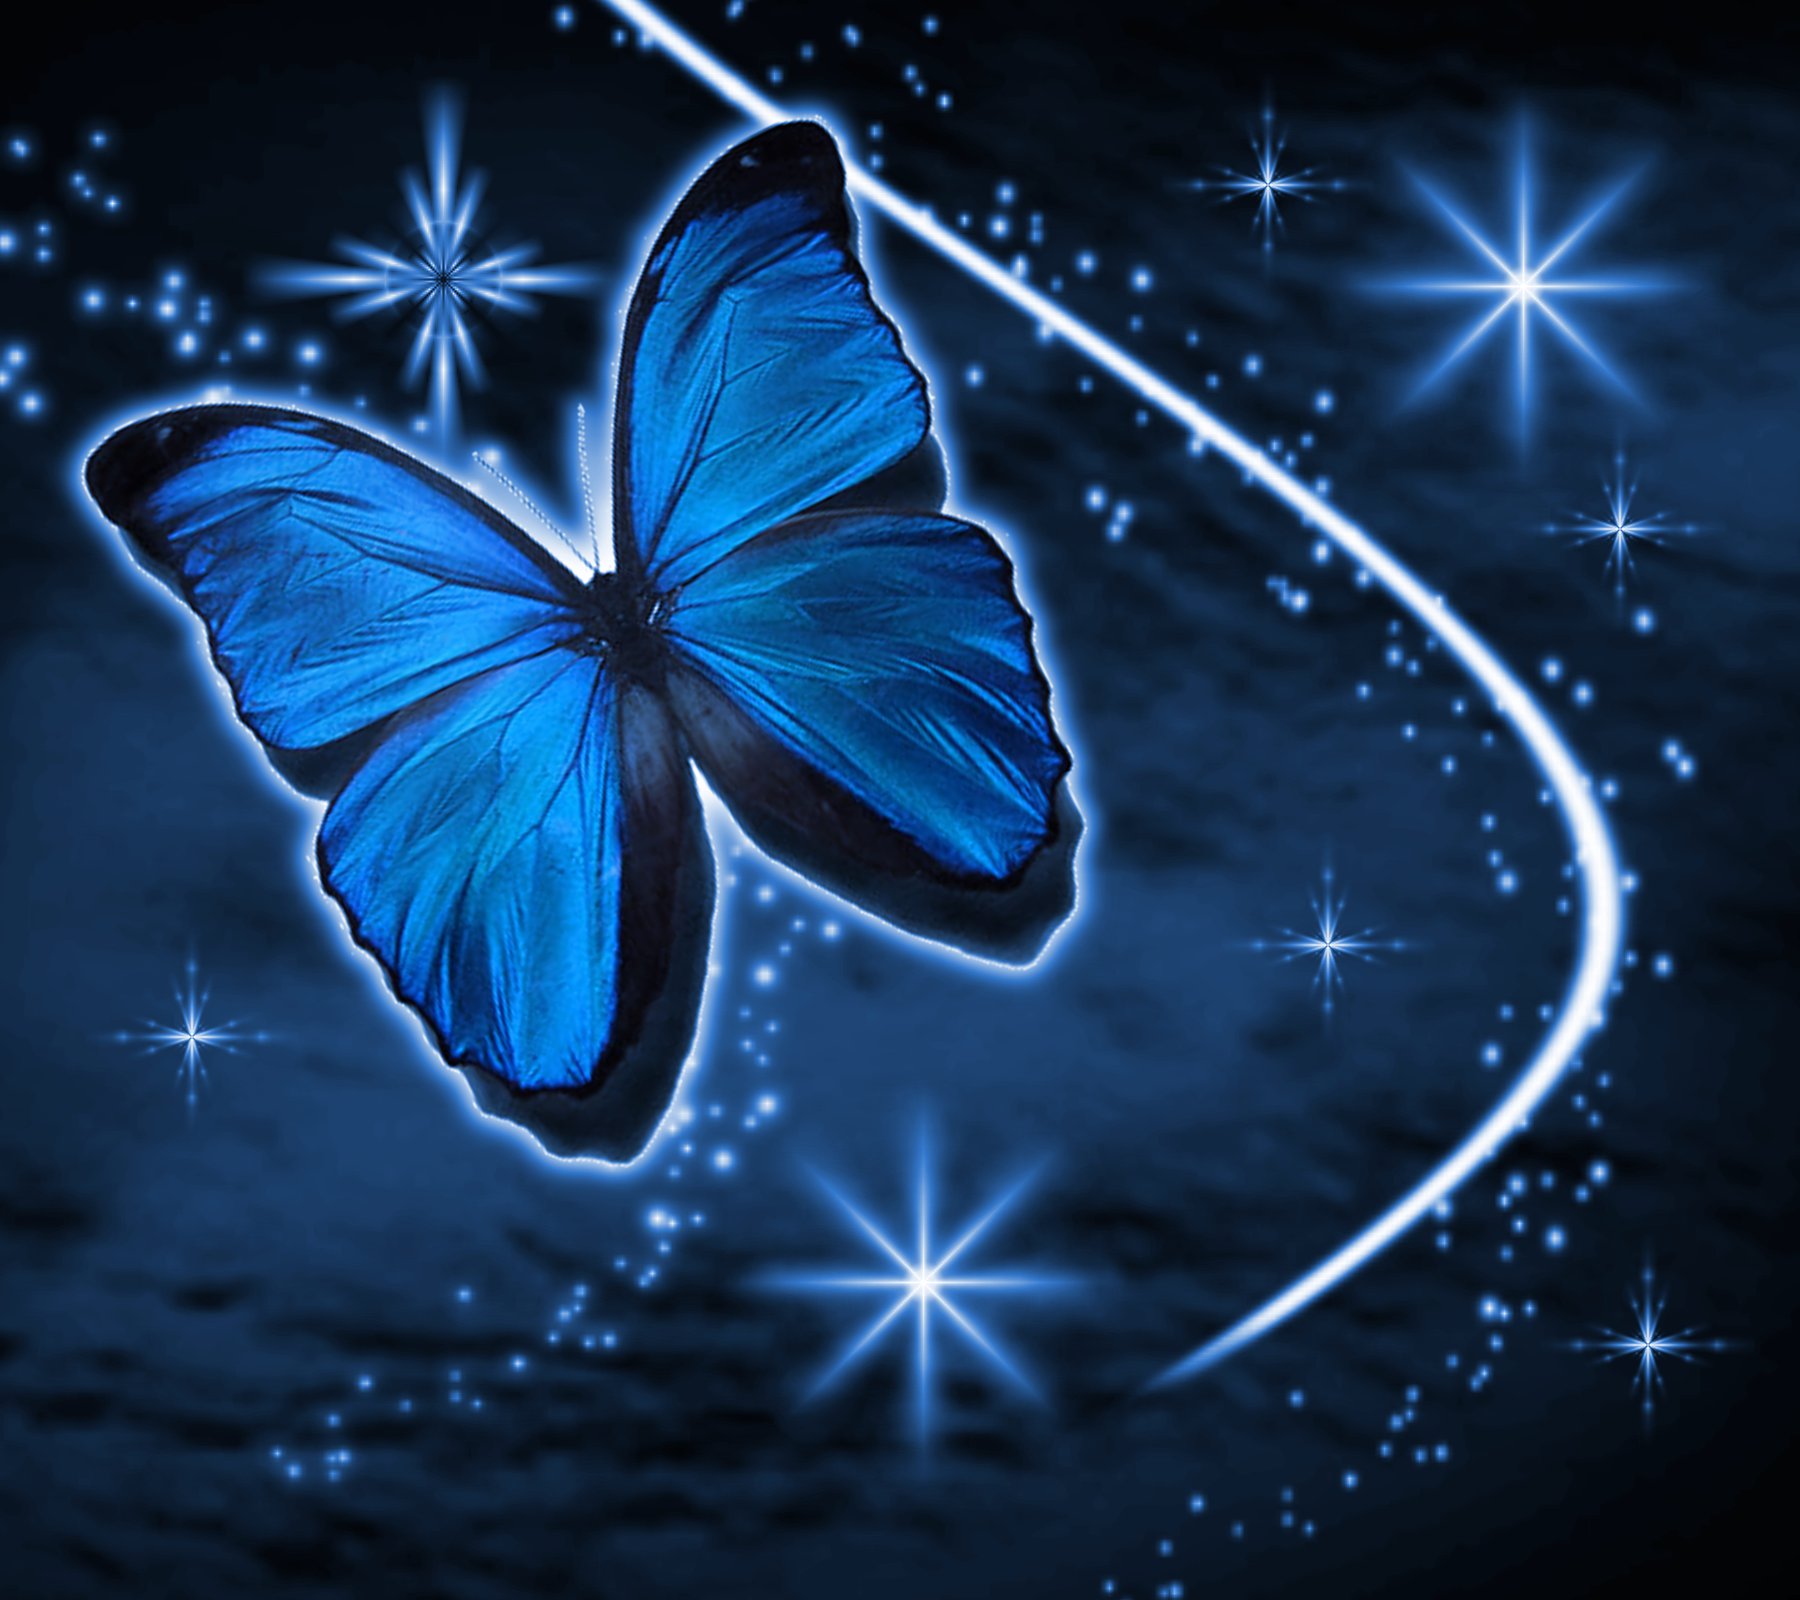 Blue Butterfly With Stars Background Image